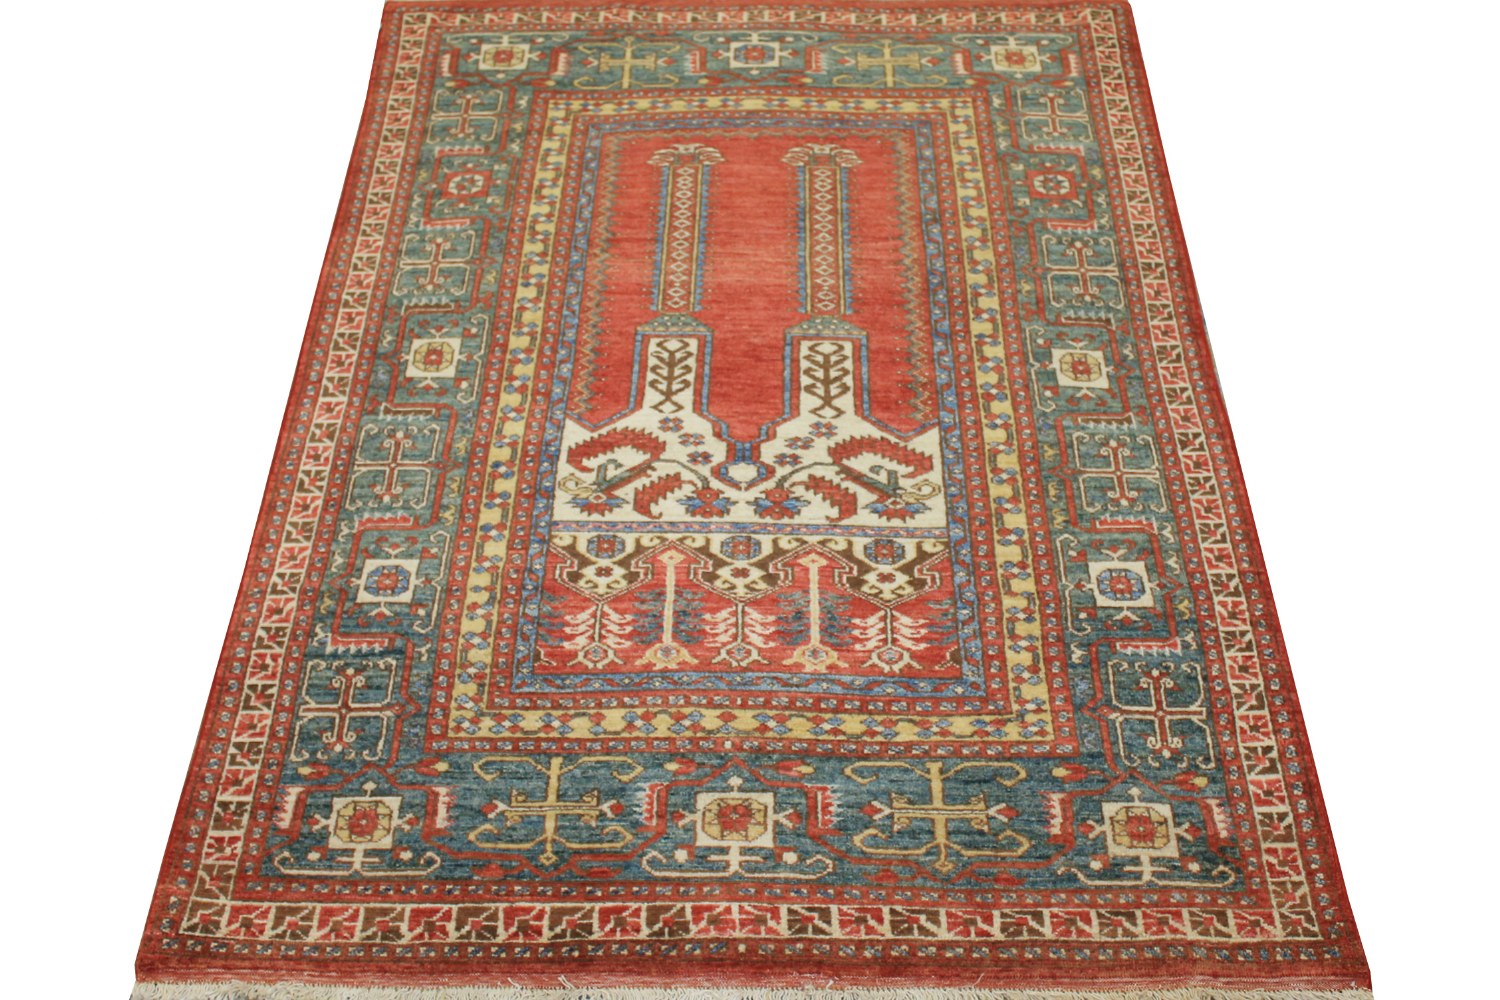 4x6 Antique Revival Hand Knotted Wool Area Rug - MR11116